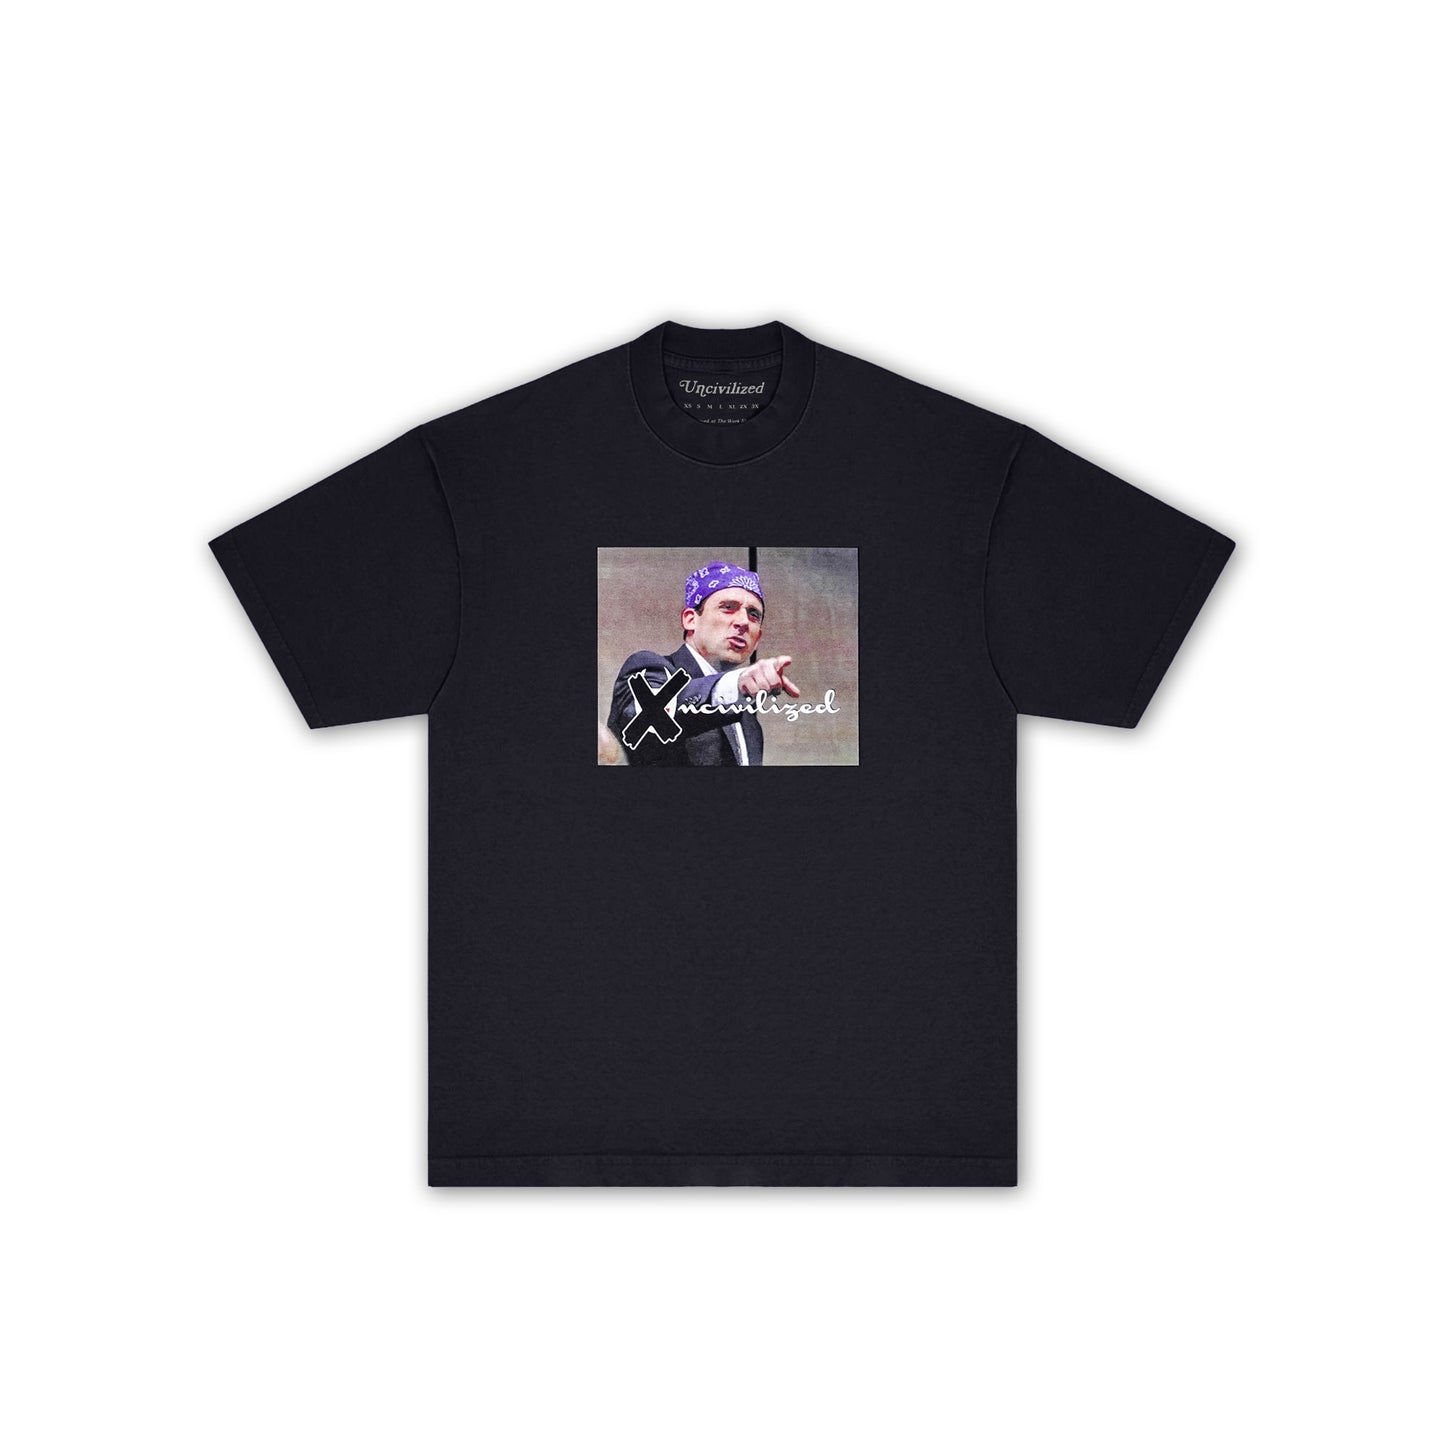 EARLY ACCESS: UNCIVILIZED "PRISON MIKE" T-SHIRT RESTOCK